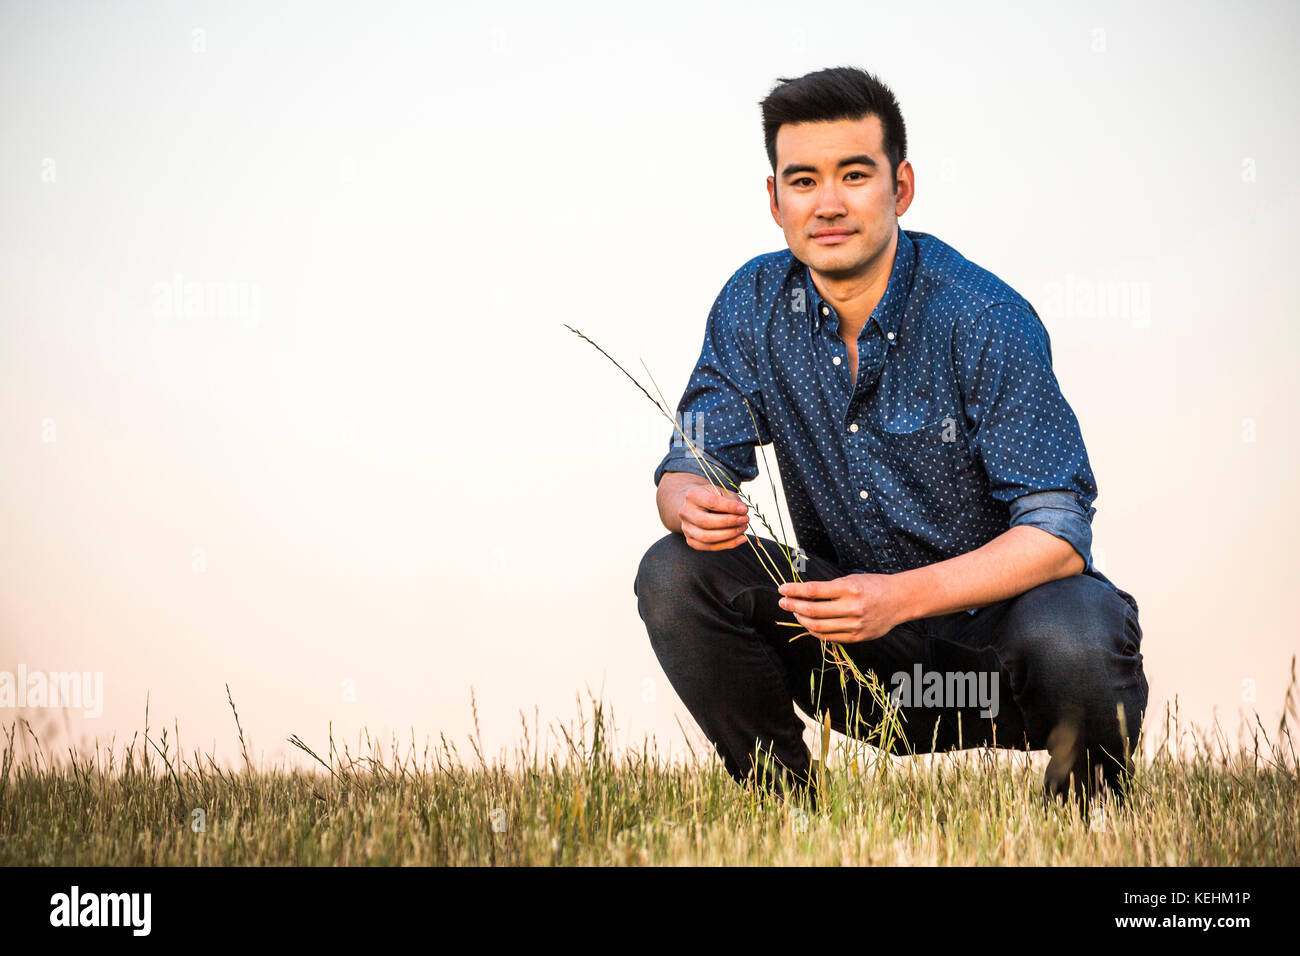 Chinese man crouching in field holding grass Stock Photo